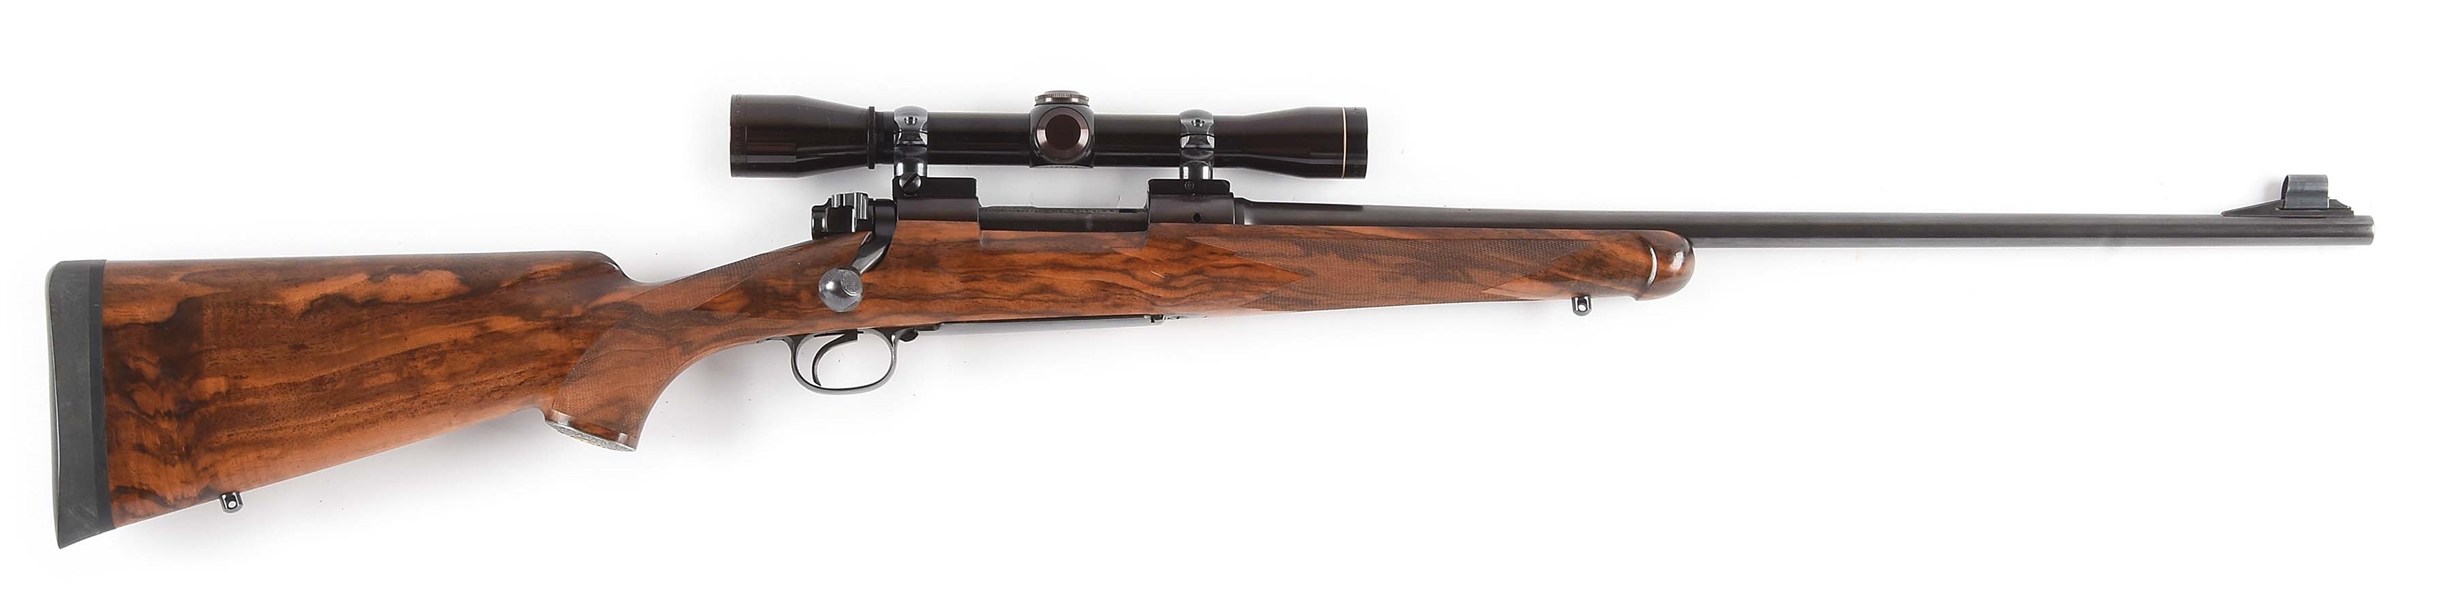 (C) CUSTOM STOCKED PRE-64 WINCHESTER MODEL 70 FEATHERWEIGHT .30-06 BOLT ACTION RIFLE (1953).